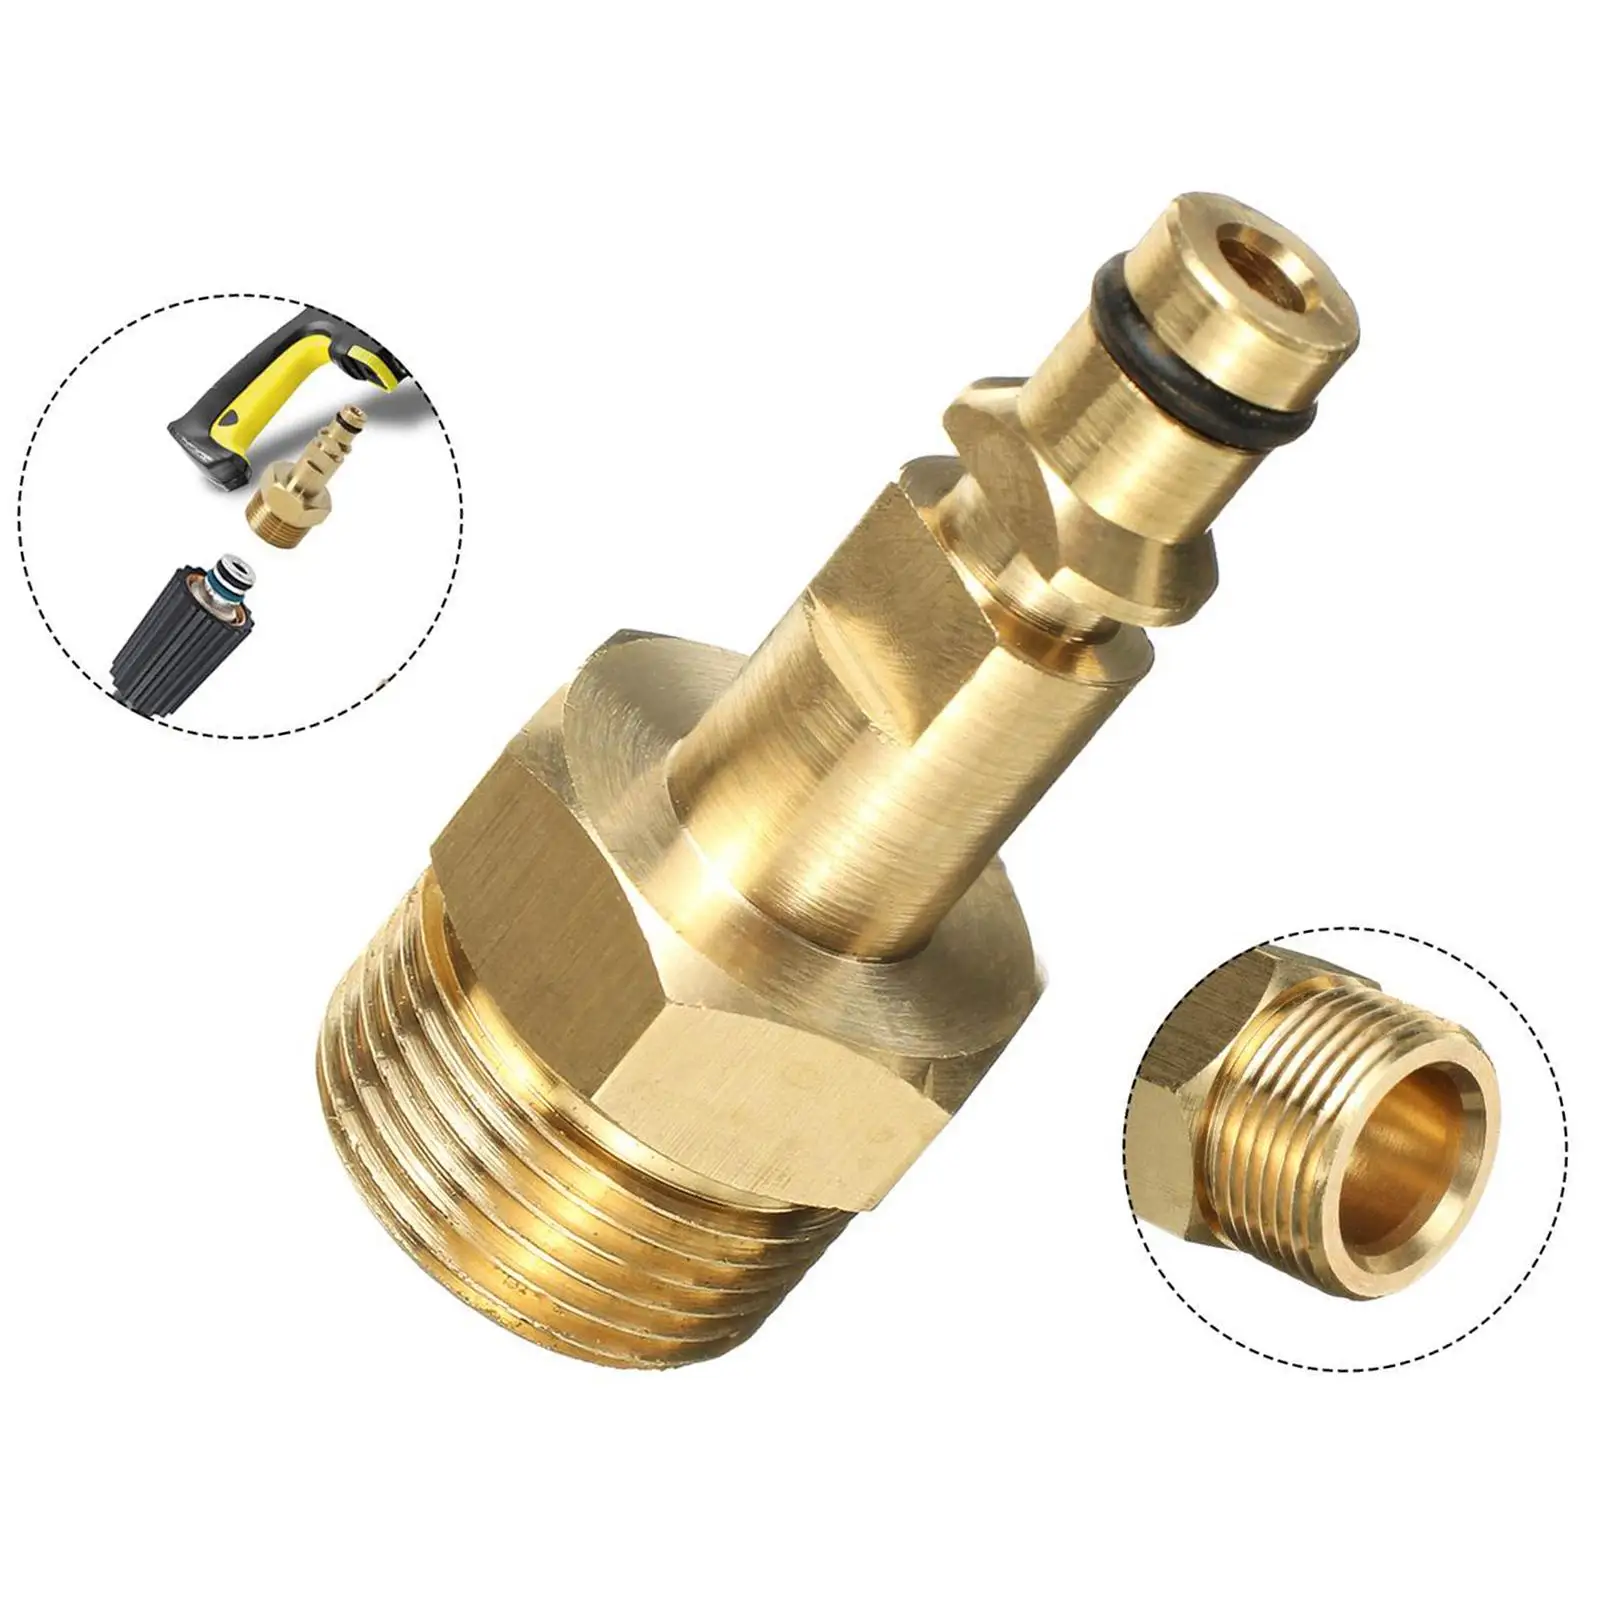 2 Pressure Cleaner Hose Adapter Quick Connector Copper Pressure Washer Adapter for K Replacement Kits Home Garden